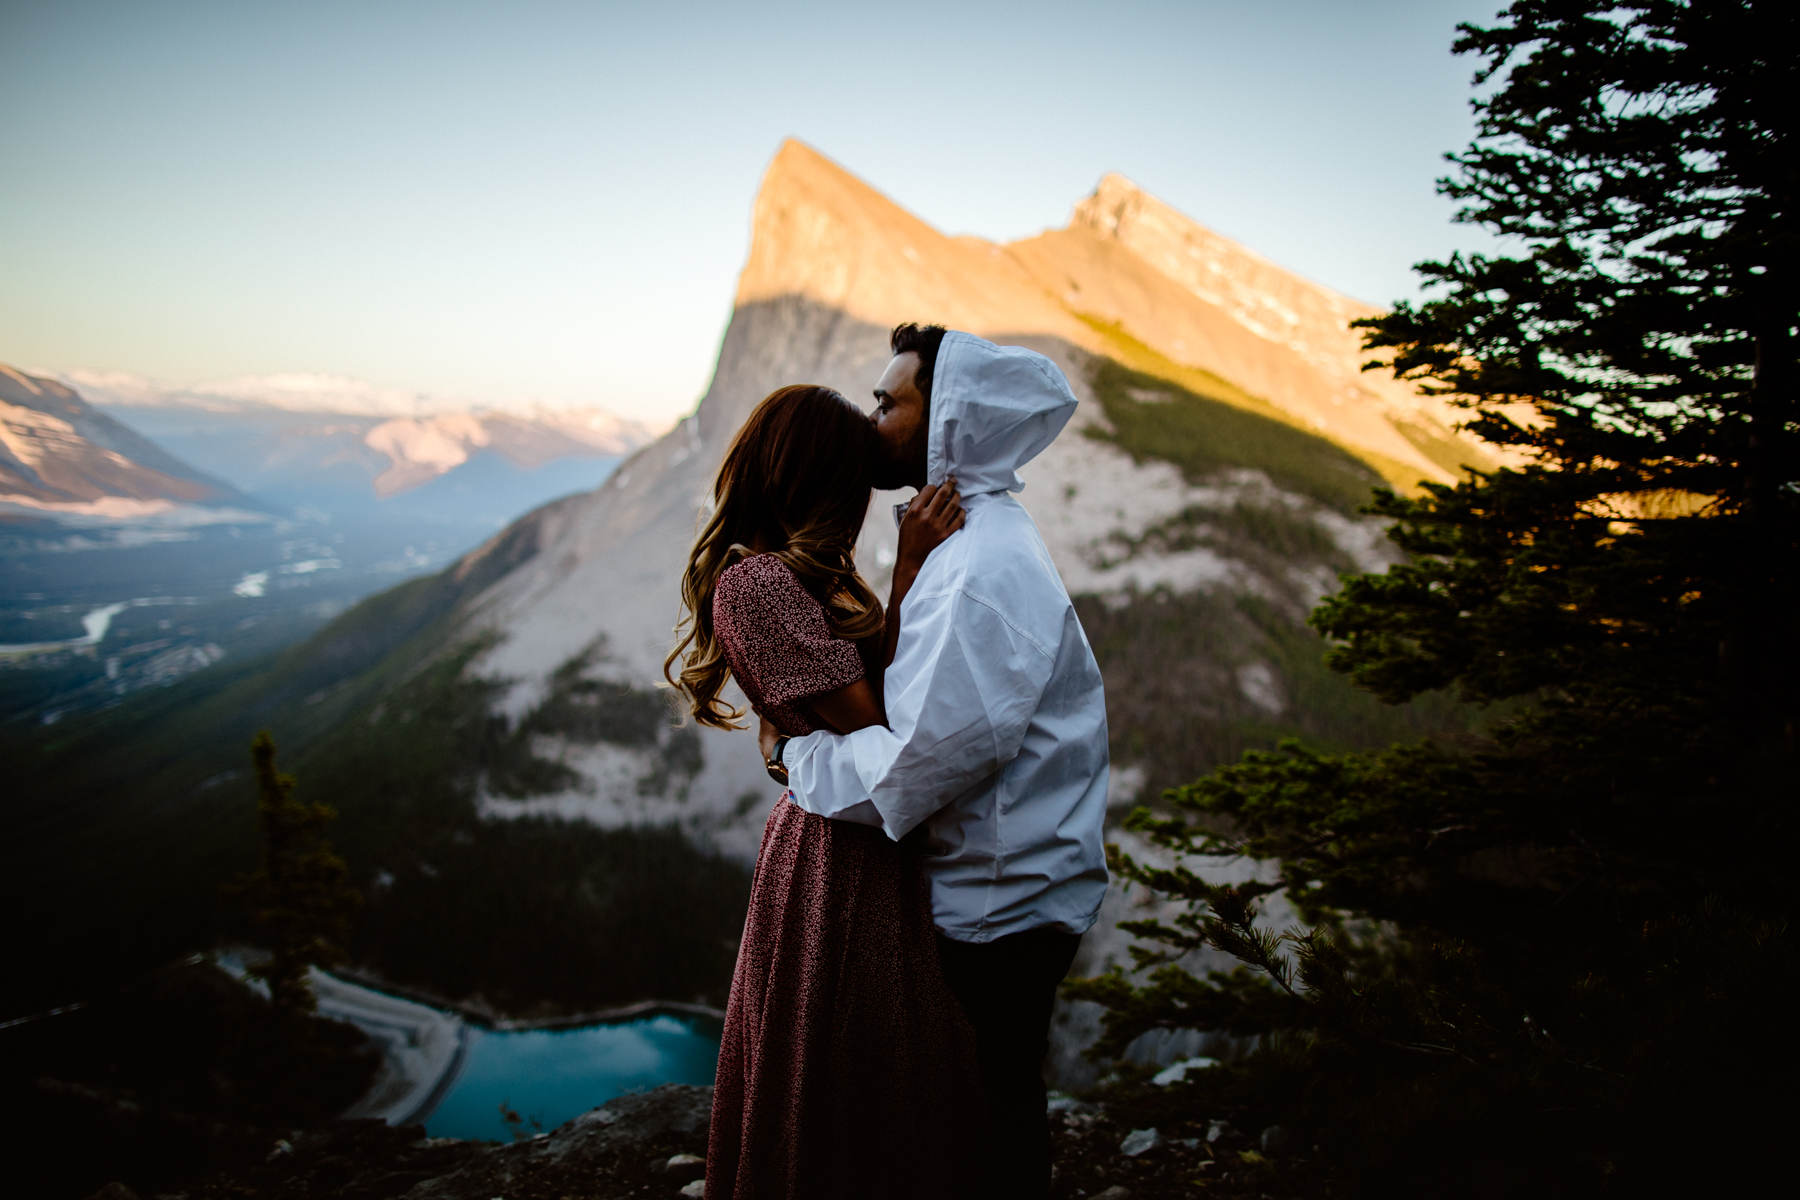 Surprise Proposal Photographers in Banff - Photo 23